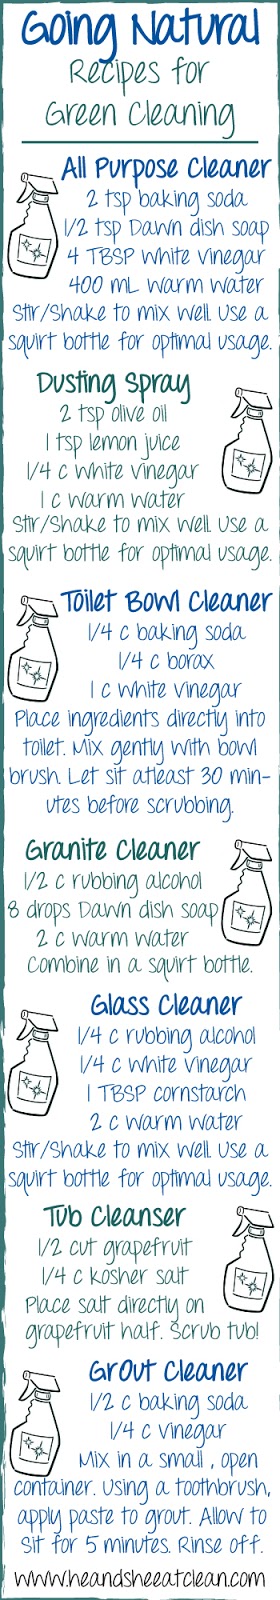 Are Your Cleaning Products Really "Clean?" - Recipes to Help You Clean | He and She Eat Clean